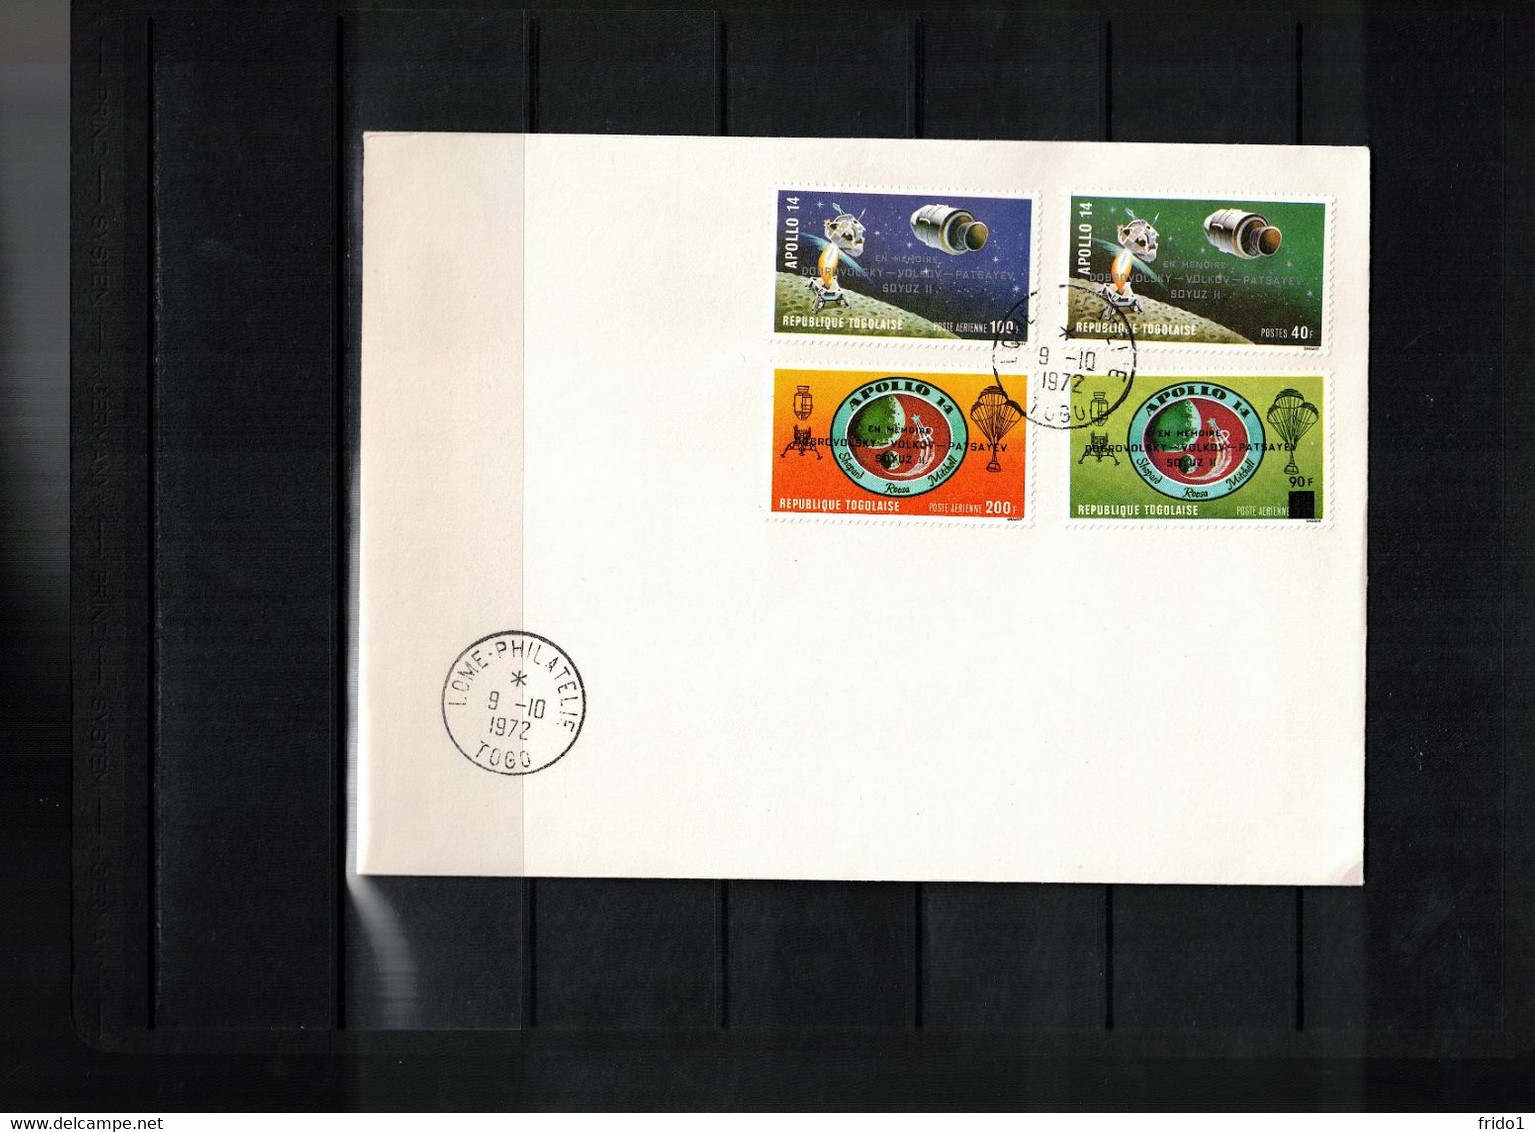 Togo 1972 Space / Raumfahrt Apollo 14 Set Overprinted With Soyuz Tragedy Overprint Set Interesting Cover - Afrique